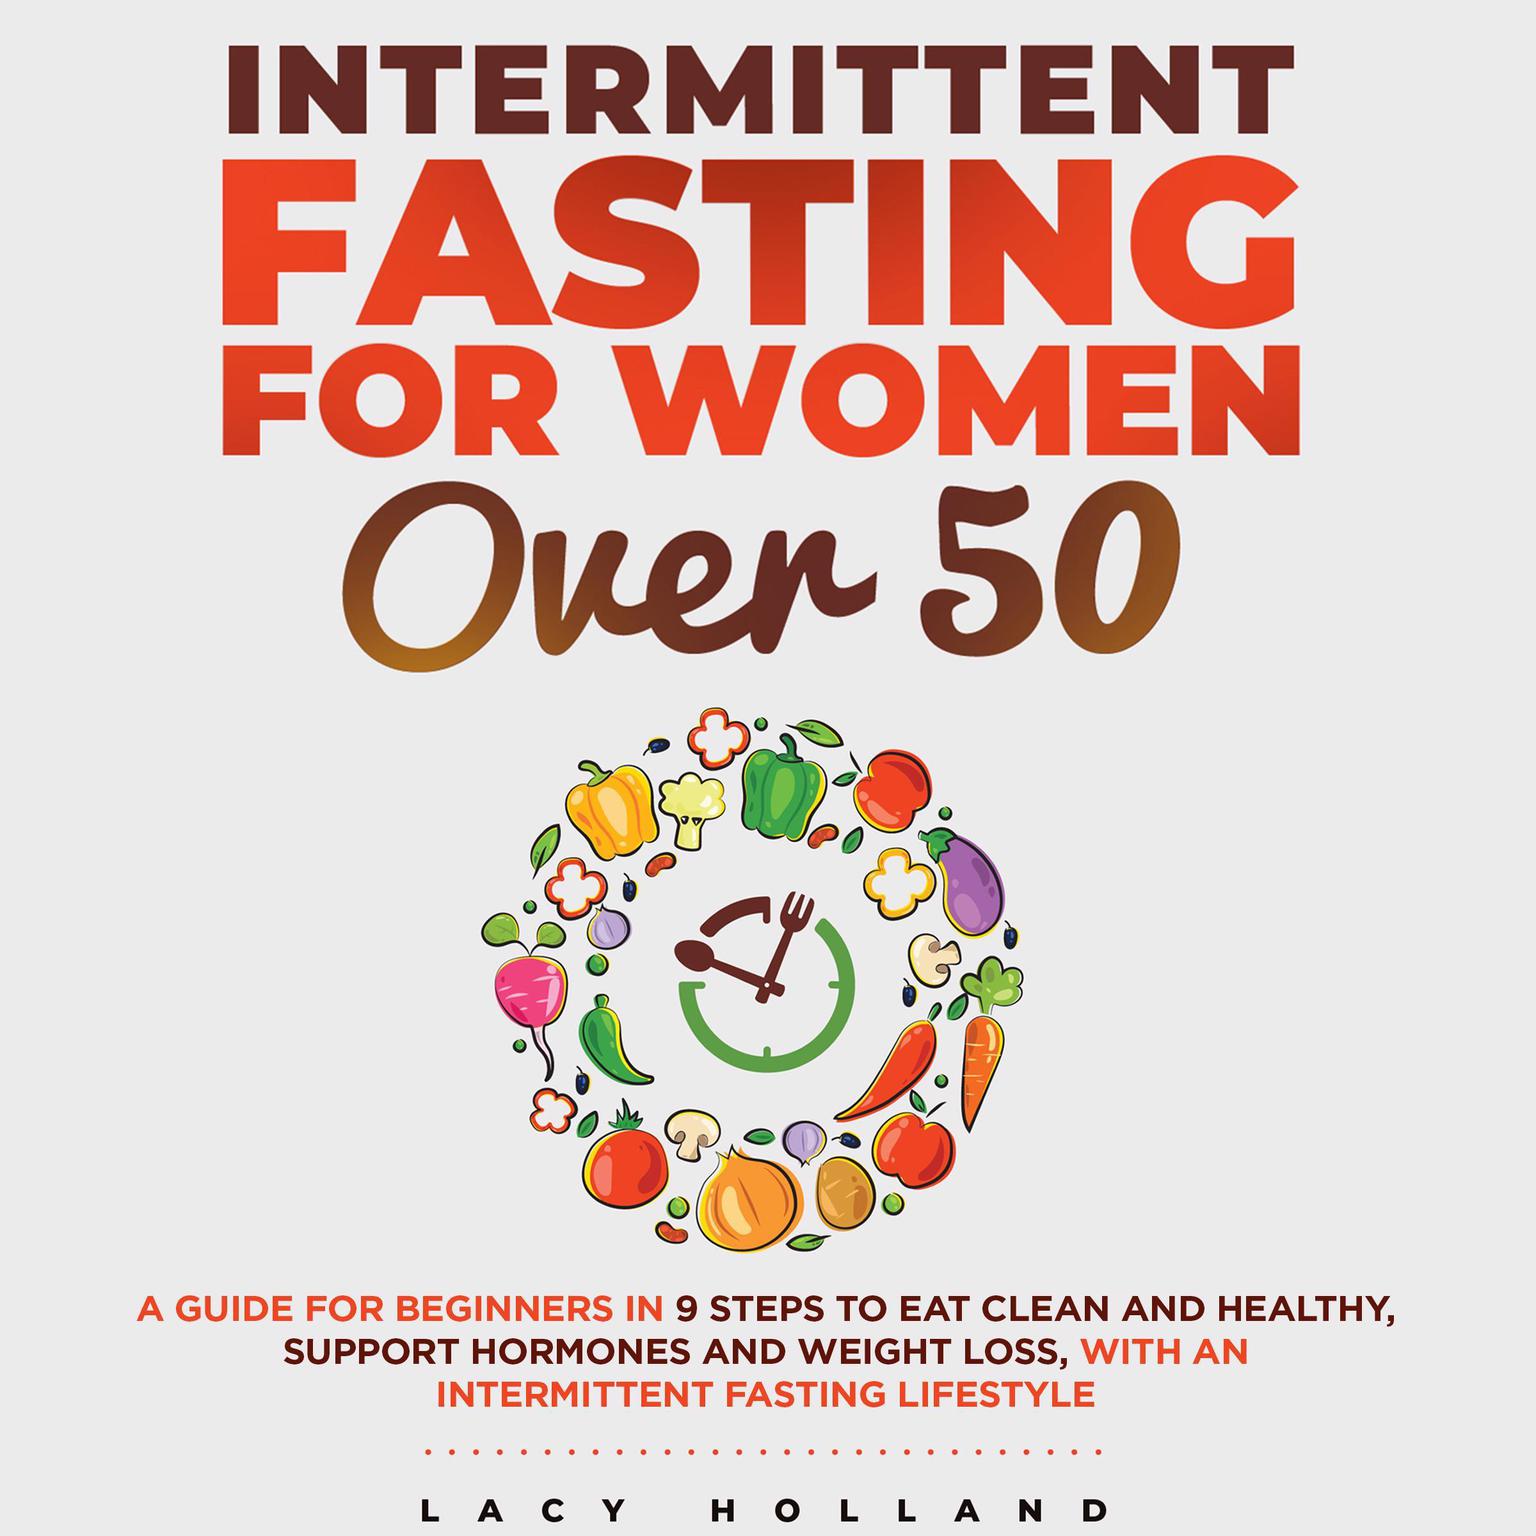 Intermittent Fasting for Women Over 50: A Guide for Beginners in 9 Steps to Eat Clean and Healthy, Support Hormones and Weight Loss, with an Intermittent Fasting Lifestyle Audiobook, by Lacy Holland